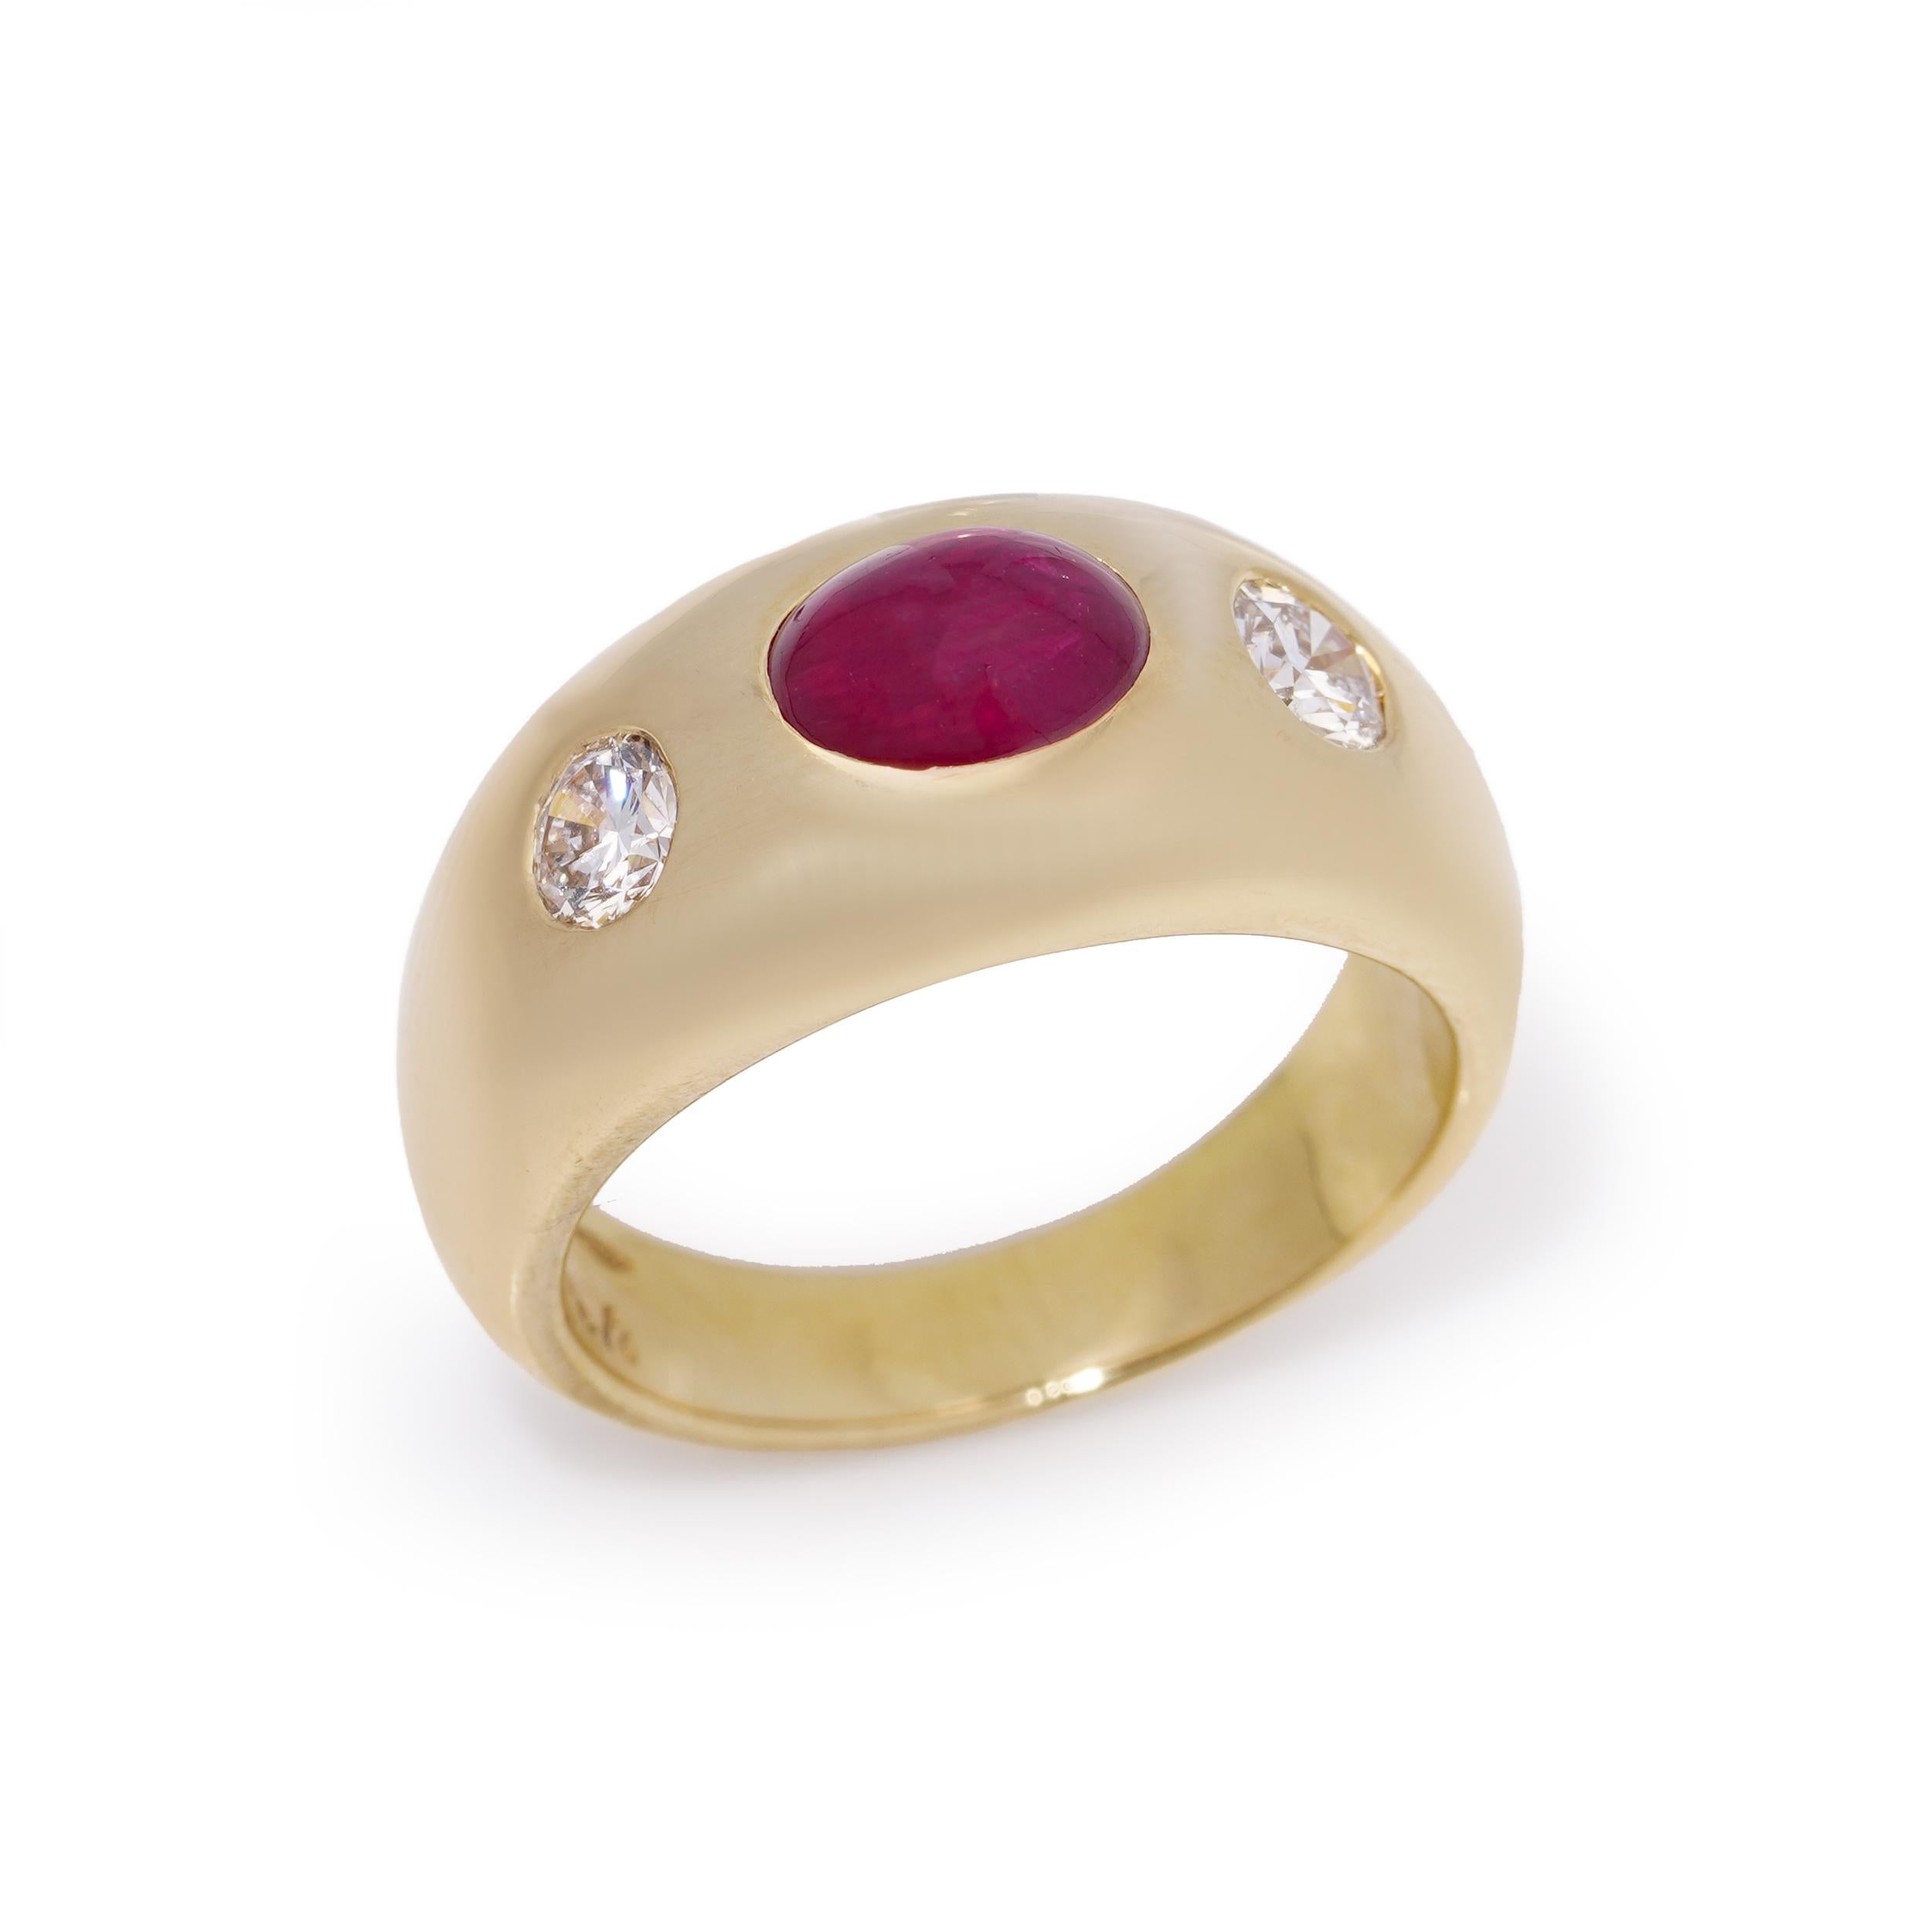 Bvlgari 18kt. gold three - stone Burma Cabochon ruby and diamond ring For Sale 4